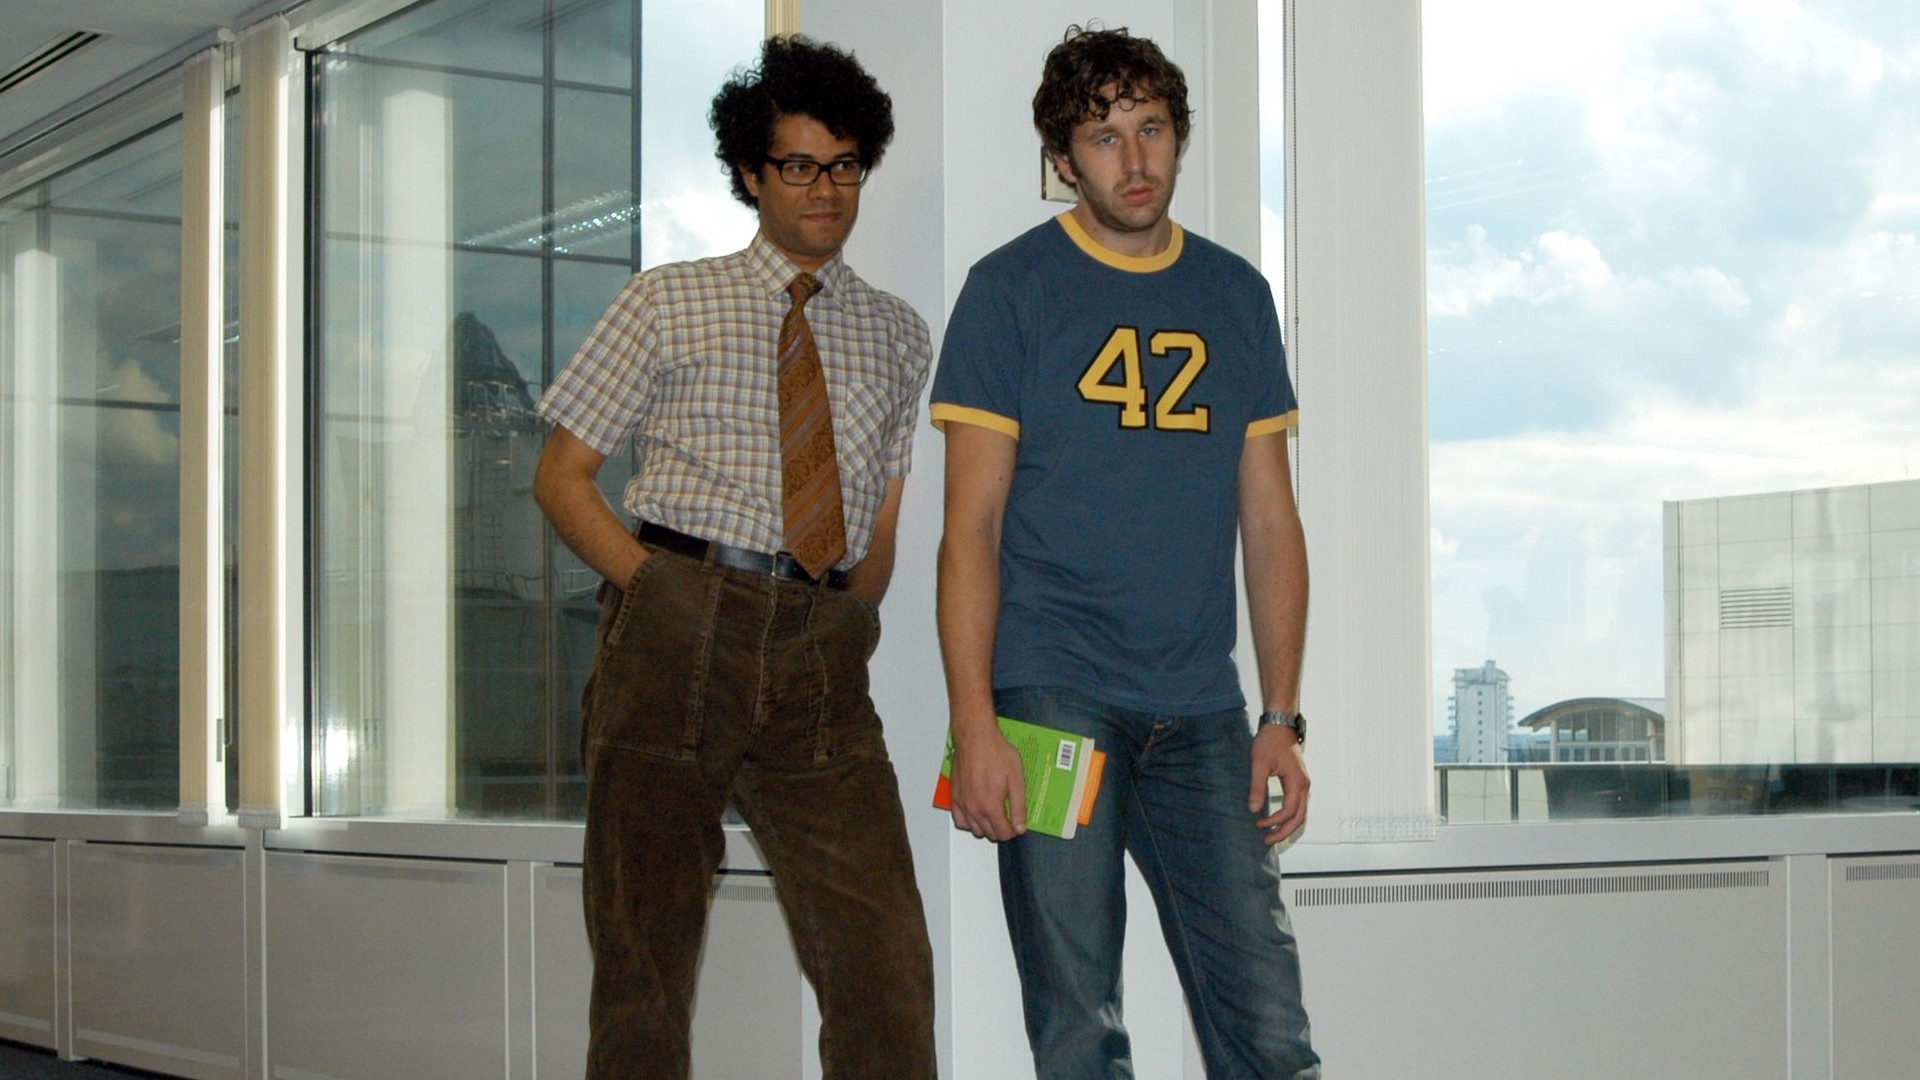 1920x1080 The IT Crowd Source: Keys: television, the it crowd, wallpaper, wallpapers.  Submitted Anonymously 3 years ago